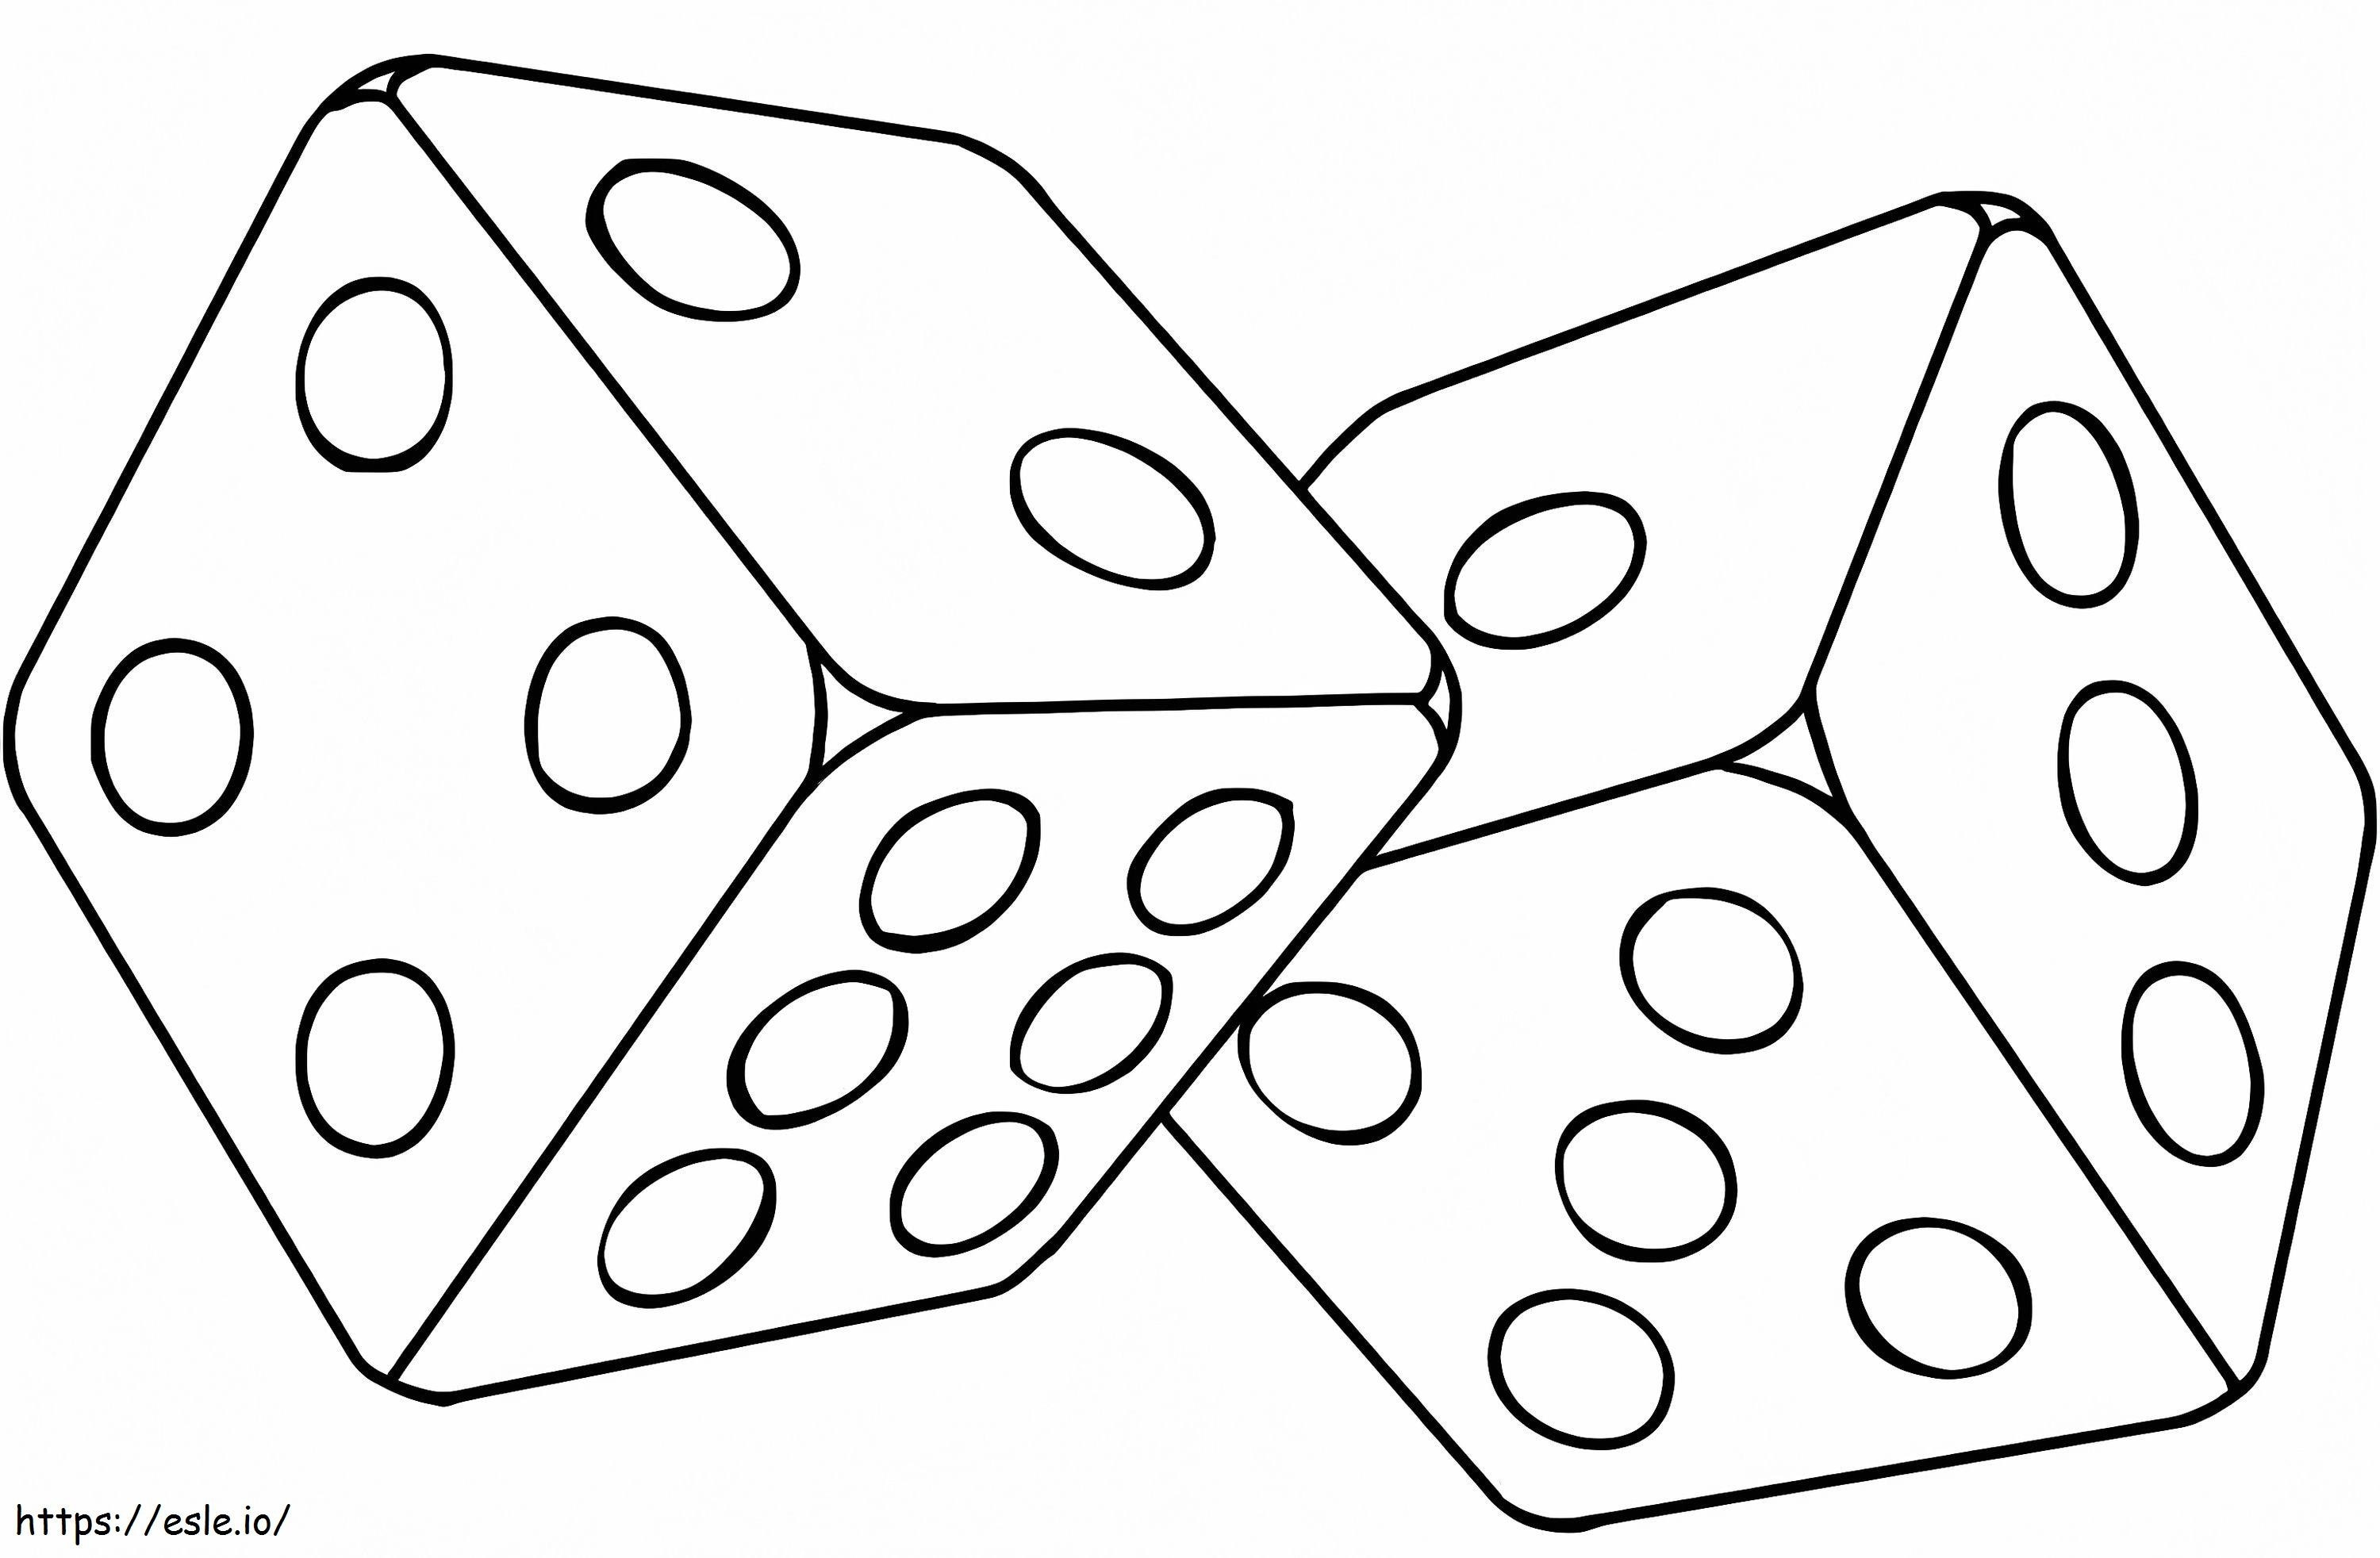 Dice Free Printable coloring page